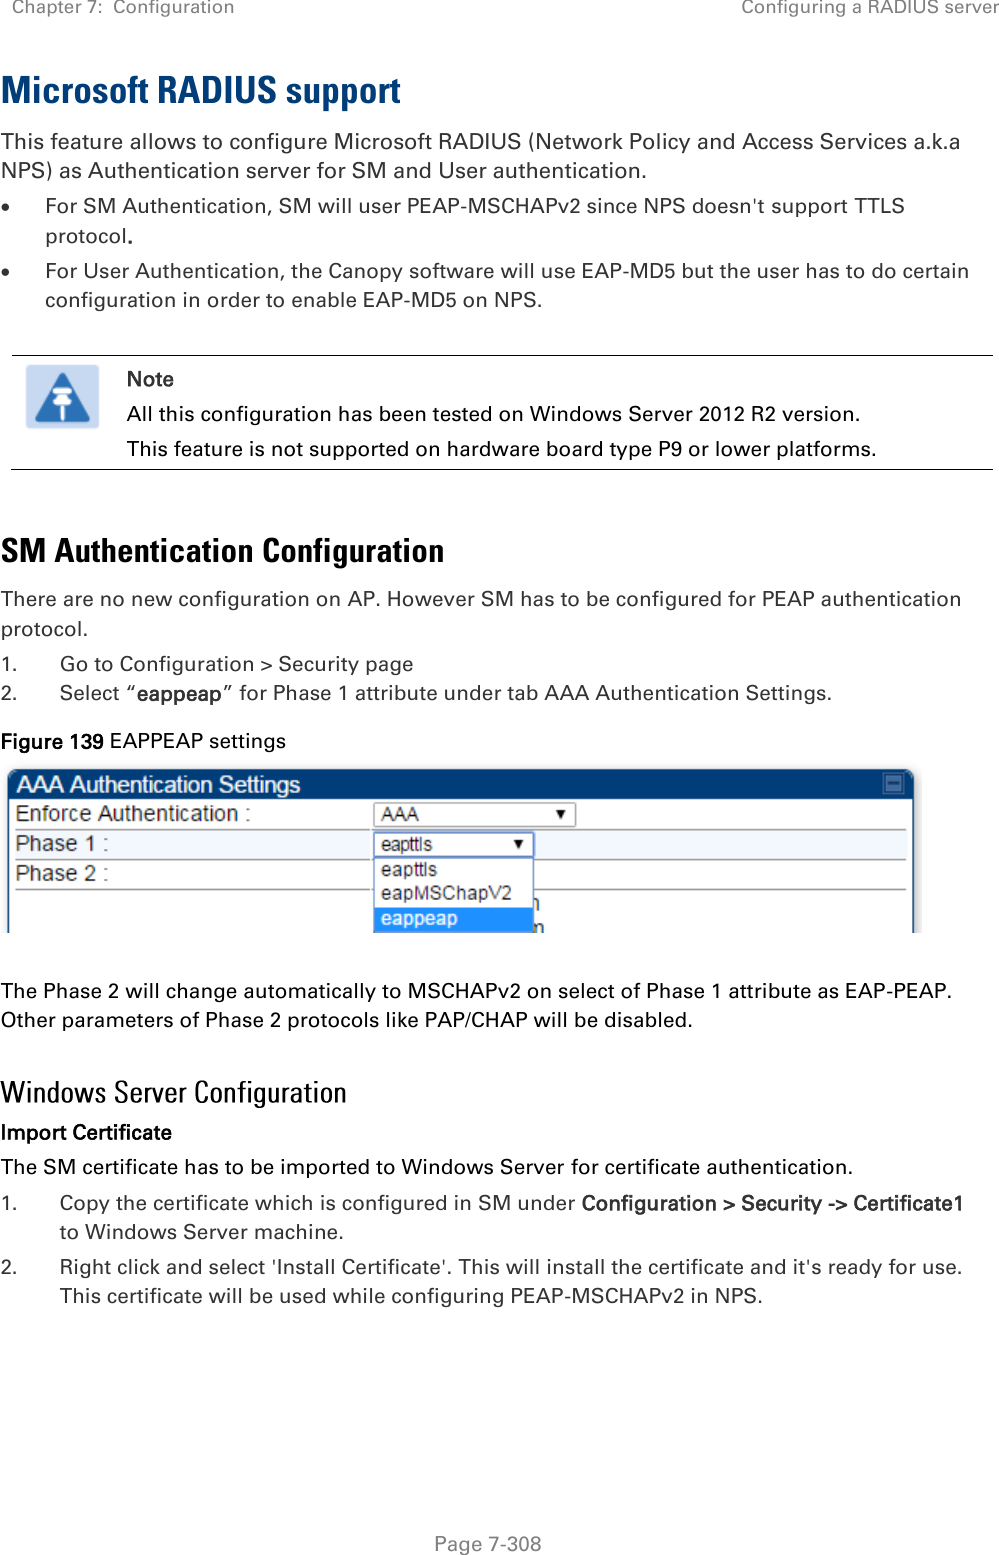 Chapter 7:  Configuration Configuring a RADIUS server   Page 7-308 Microsoft RADIUS support This feature allows to configure Microsoft RADIUS (Network Policy and Access Services a.k.a NPS) as Authentication server for SM and User authentication.  For SM Authentication, SM will user PEAP-MSCHAPv2 since NPS doesn&apos;t support TTLS protocol.  For User Authentication, the Canopy software will use EAP-MD5 but the user has to do certain configuration in order to enable EAP-MD5 on NPS.   Note All this configuration has been tested on Windows Server 2012 R2 version. This feature is not supported on hardware board type P9 or lower platforms.  SM Authentication Configuration There are no new configuration on AP. However SM has to be configured for PEAP authentication protocol. 1. Go to Configuration &gt; Security page 2. Select “eappeap” for Phase 1 attribute under tab AAA Authentication Settings.  Figure 139 EAPPEAP settings     The Phase 2 will change automatically to MSCHAPv2 on select of Phase 1 attribute as EAP-PEAP. Other parameters of Phase 2 protocols like PAP/CHAP will be disabled.  Import Certificate The SM certificate has to be imported to Windows Server for certificate authentication. 1. Copy the certificate which is configured in SM under Configuration &gt; Security -&gt; Certificate1 to Windows Server machine. 2. Right click and select &apos;Install Certificate&apos;. This will install the certificate and it&apos;s ready for use. This certificate will be used while configuring PEAP-MSCHAPv2 in NPS.    